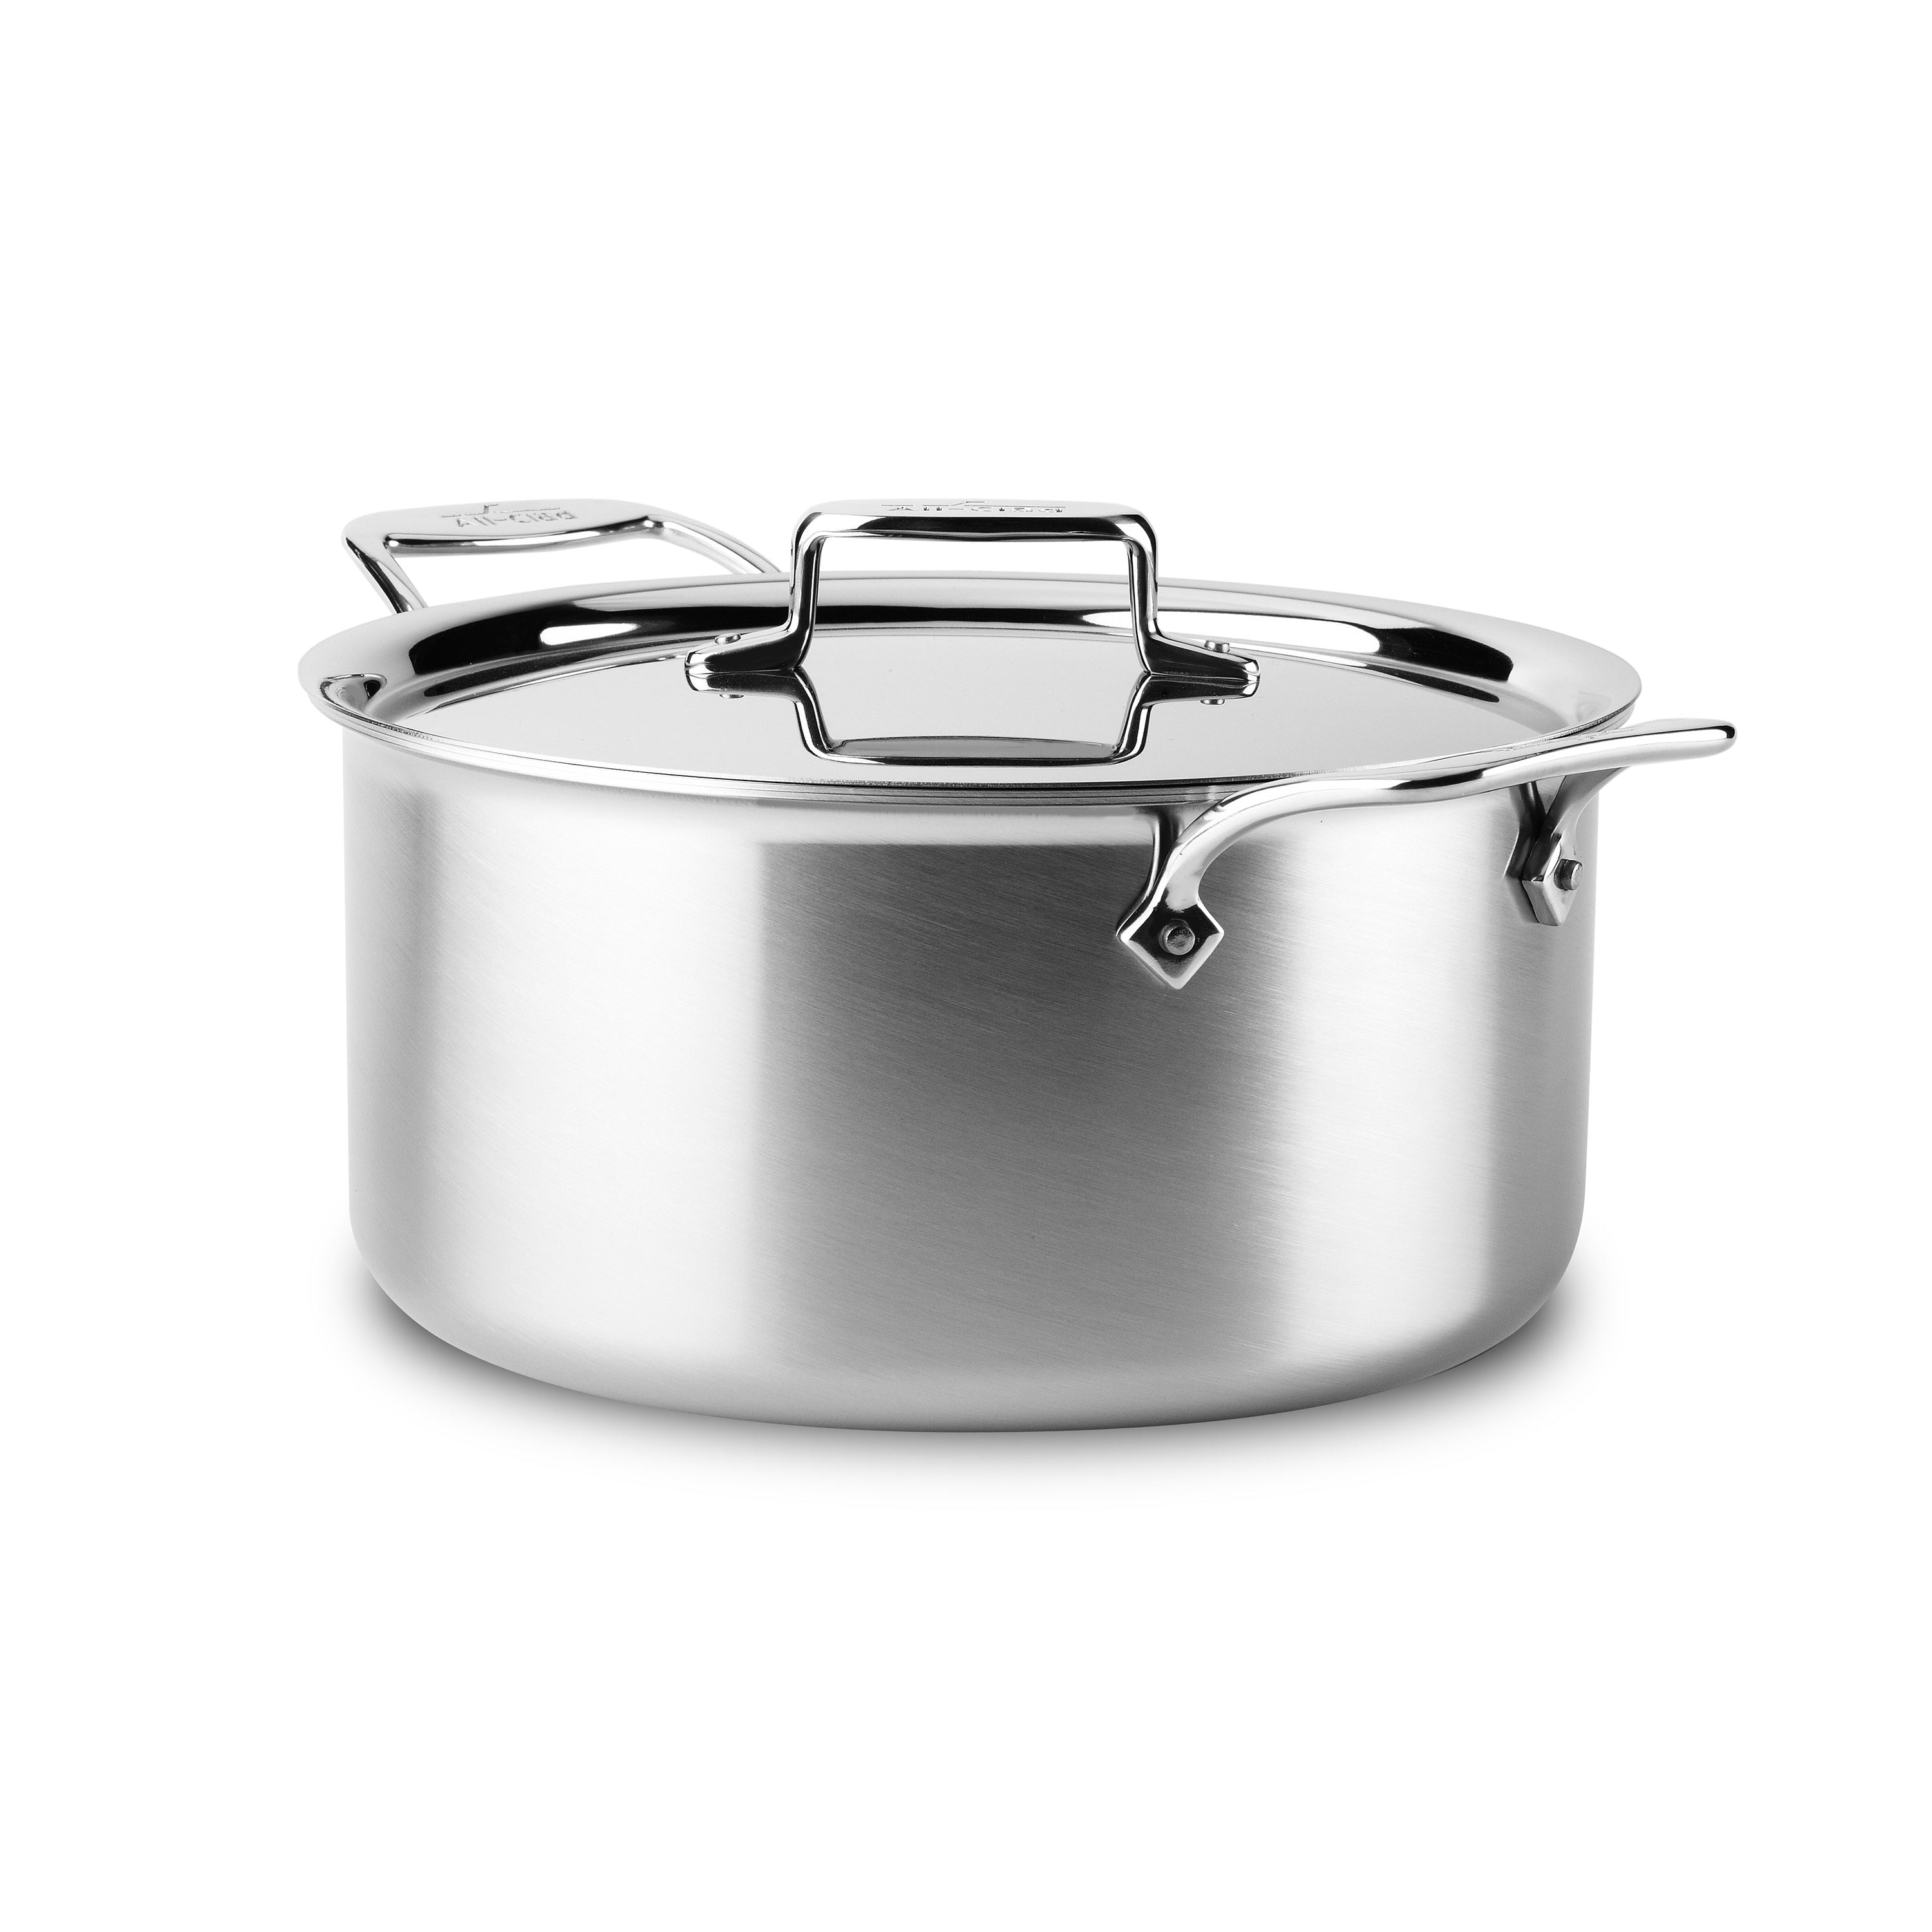 8-Quart BD5 Stainless Steel Stockpot I All-Clad